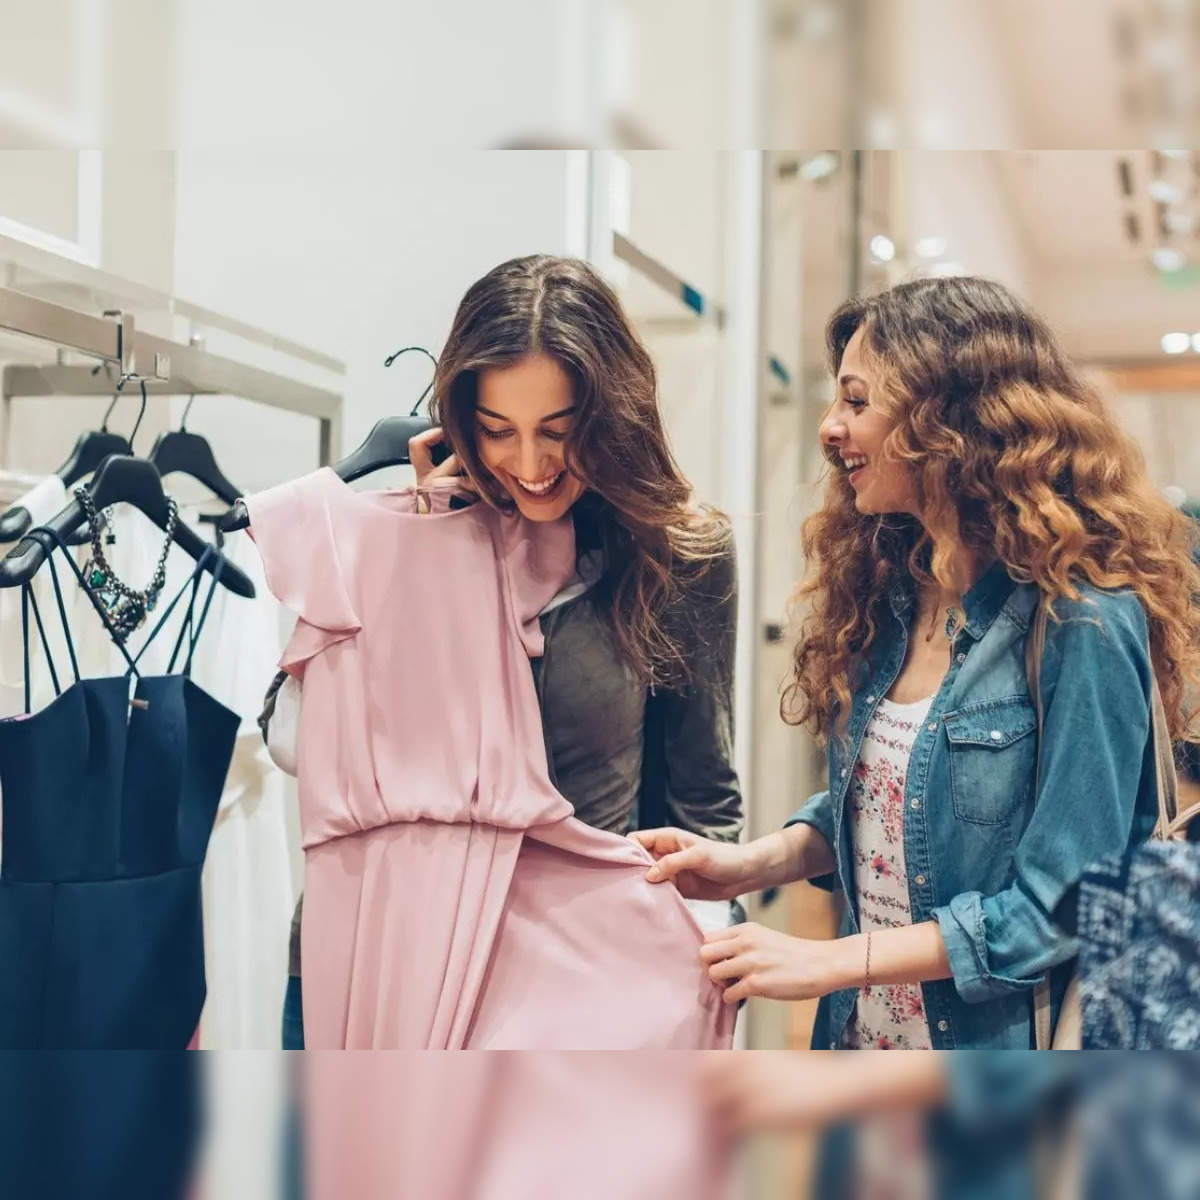 Smiling Woman Looking At Shirt While Shopping In A Clothing Store Stock  Photo - Download Image Now - iStock